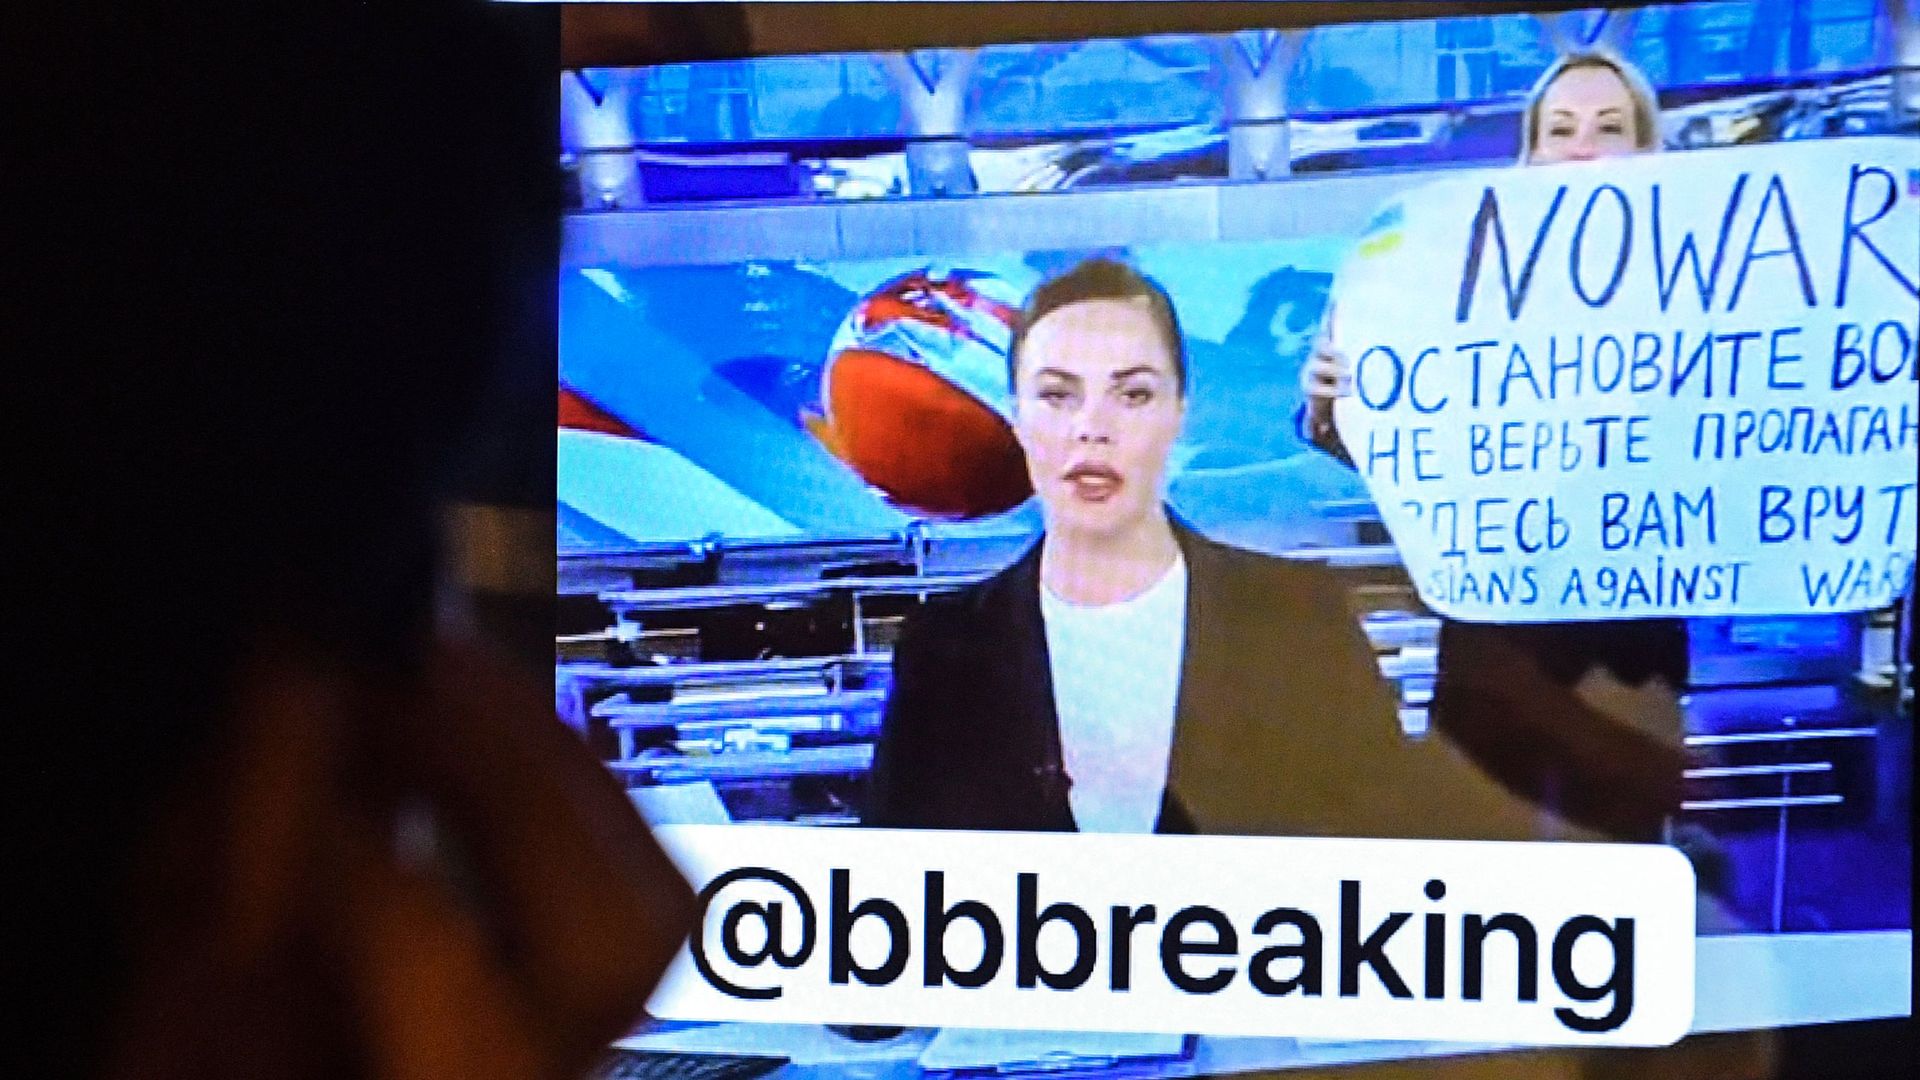 Russian state TV journalist Ovsyannikova's protest on Channel One March 14 during Russia's most-watched evening news broadcast.